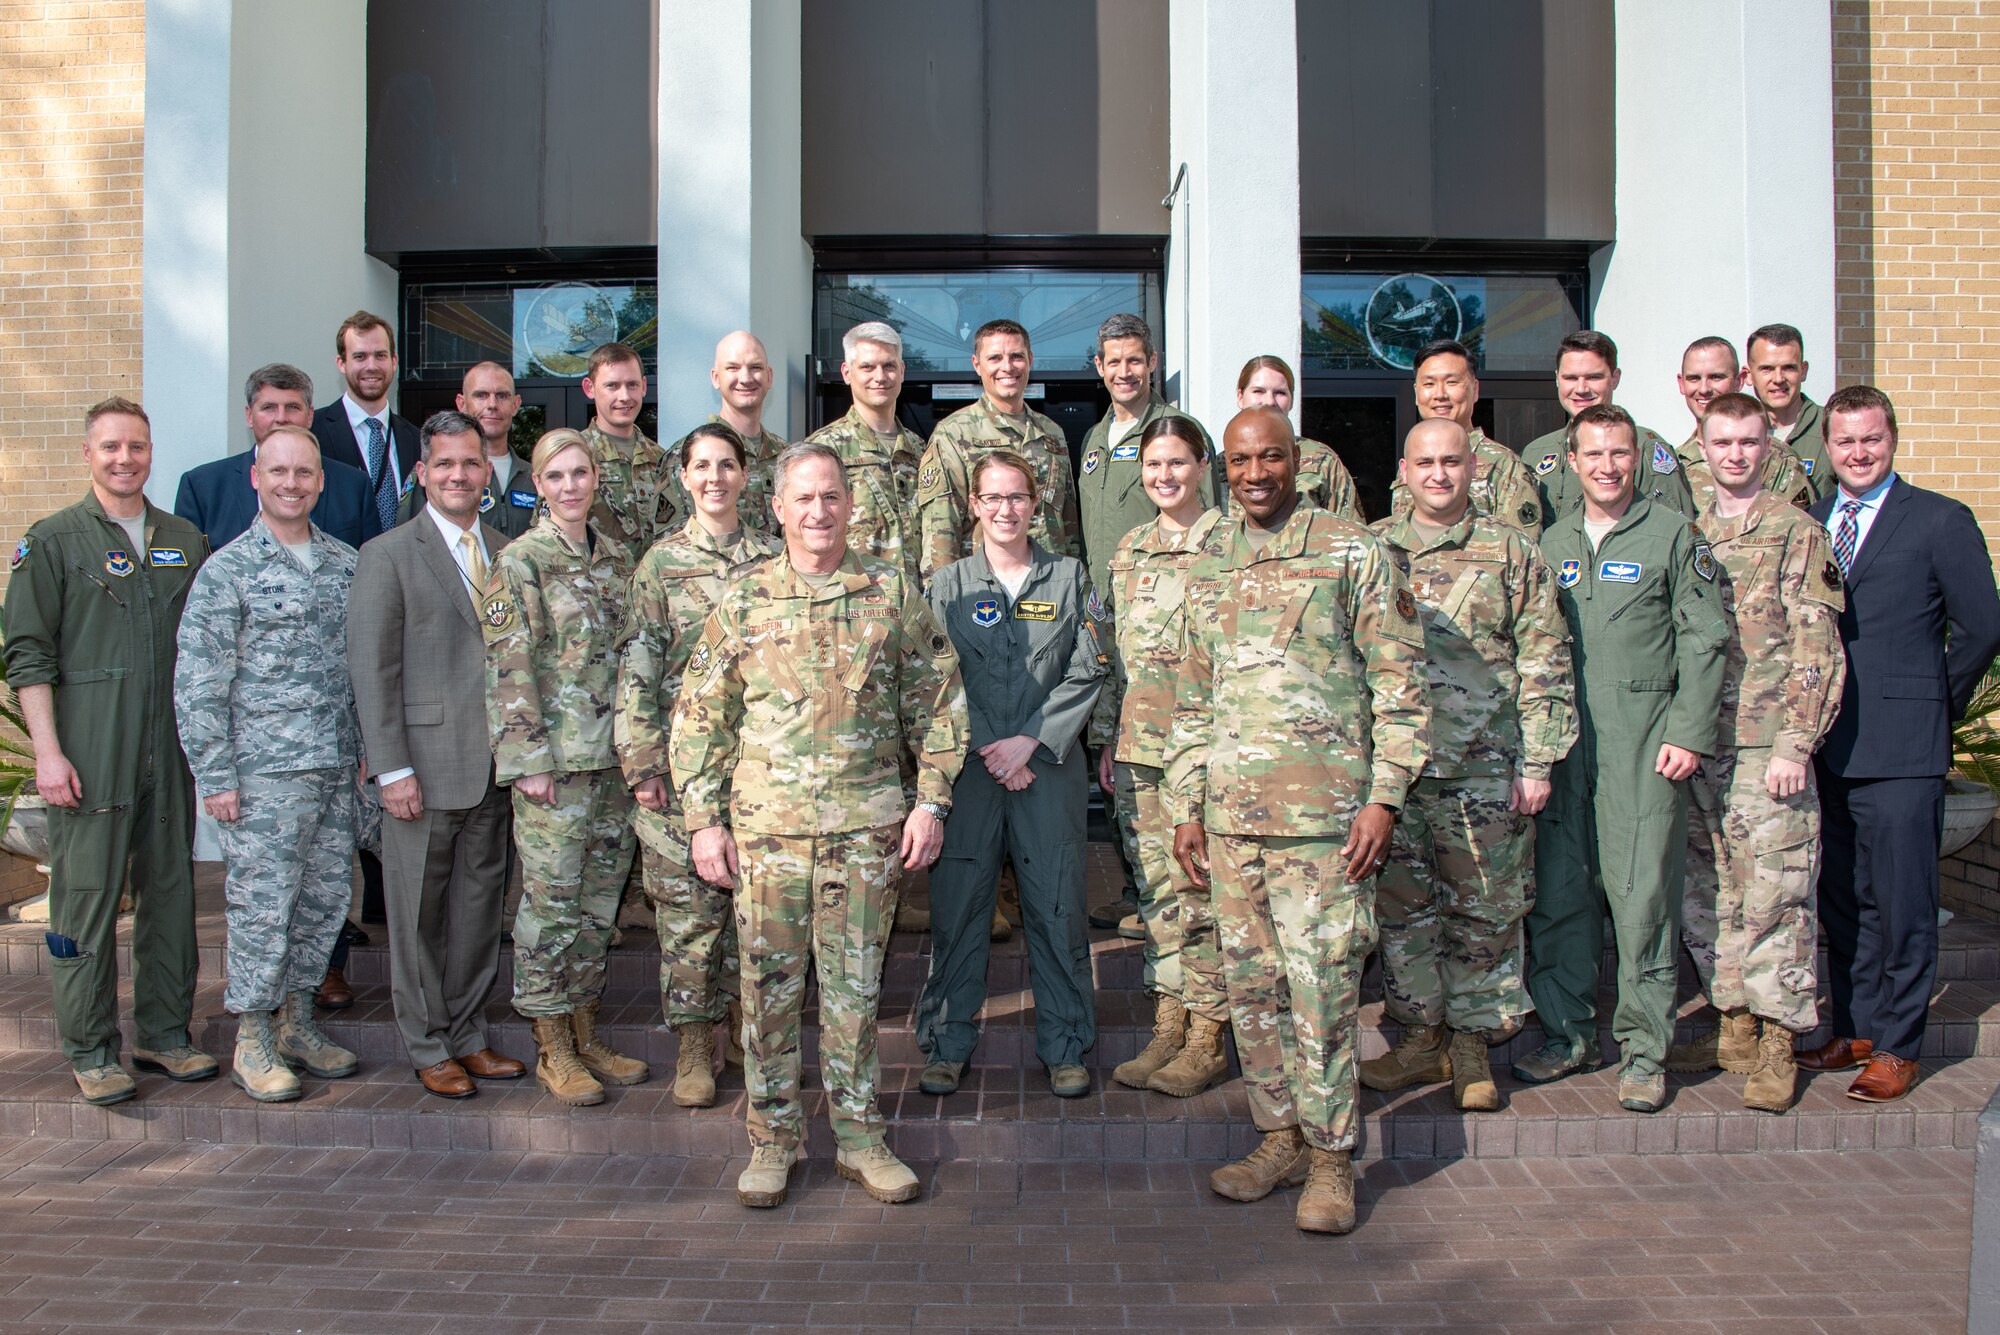 Air Force Chief of Staff Gen. David L. Goldfein and Chief Master Sergeant of the Air Force Kaleth O. Wright pose with graduates of the Center for Strategy ad Technology’s Blue Horizons class at Air War College, May 16, 2019.  (U.S. Air Force photo/Melanie Rodgers Cox)